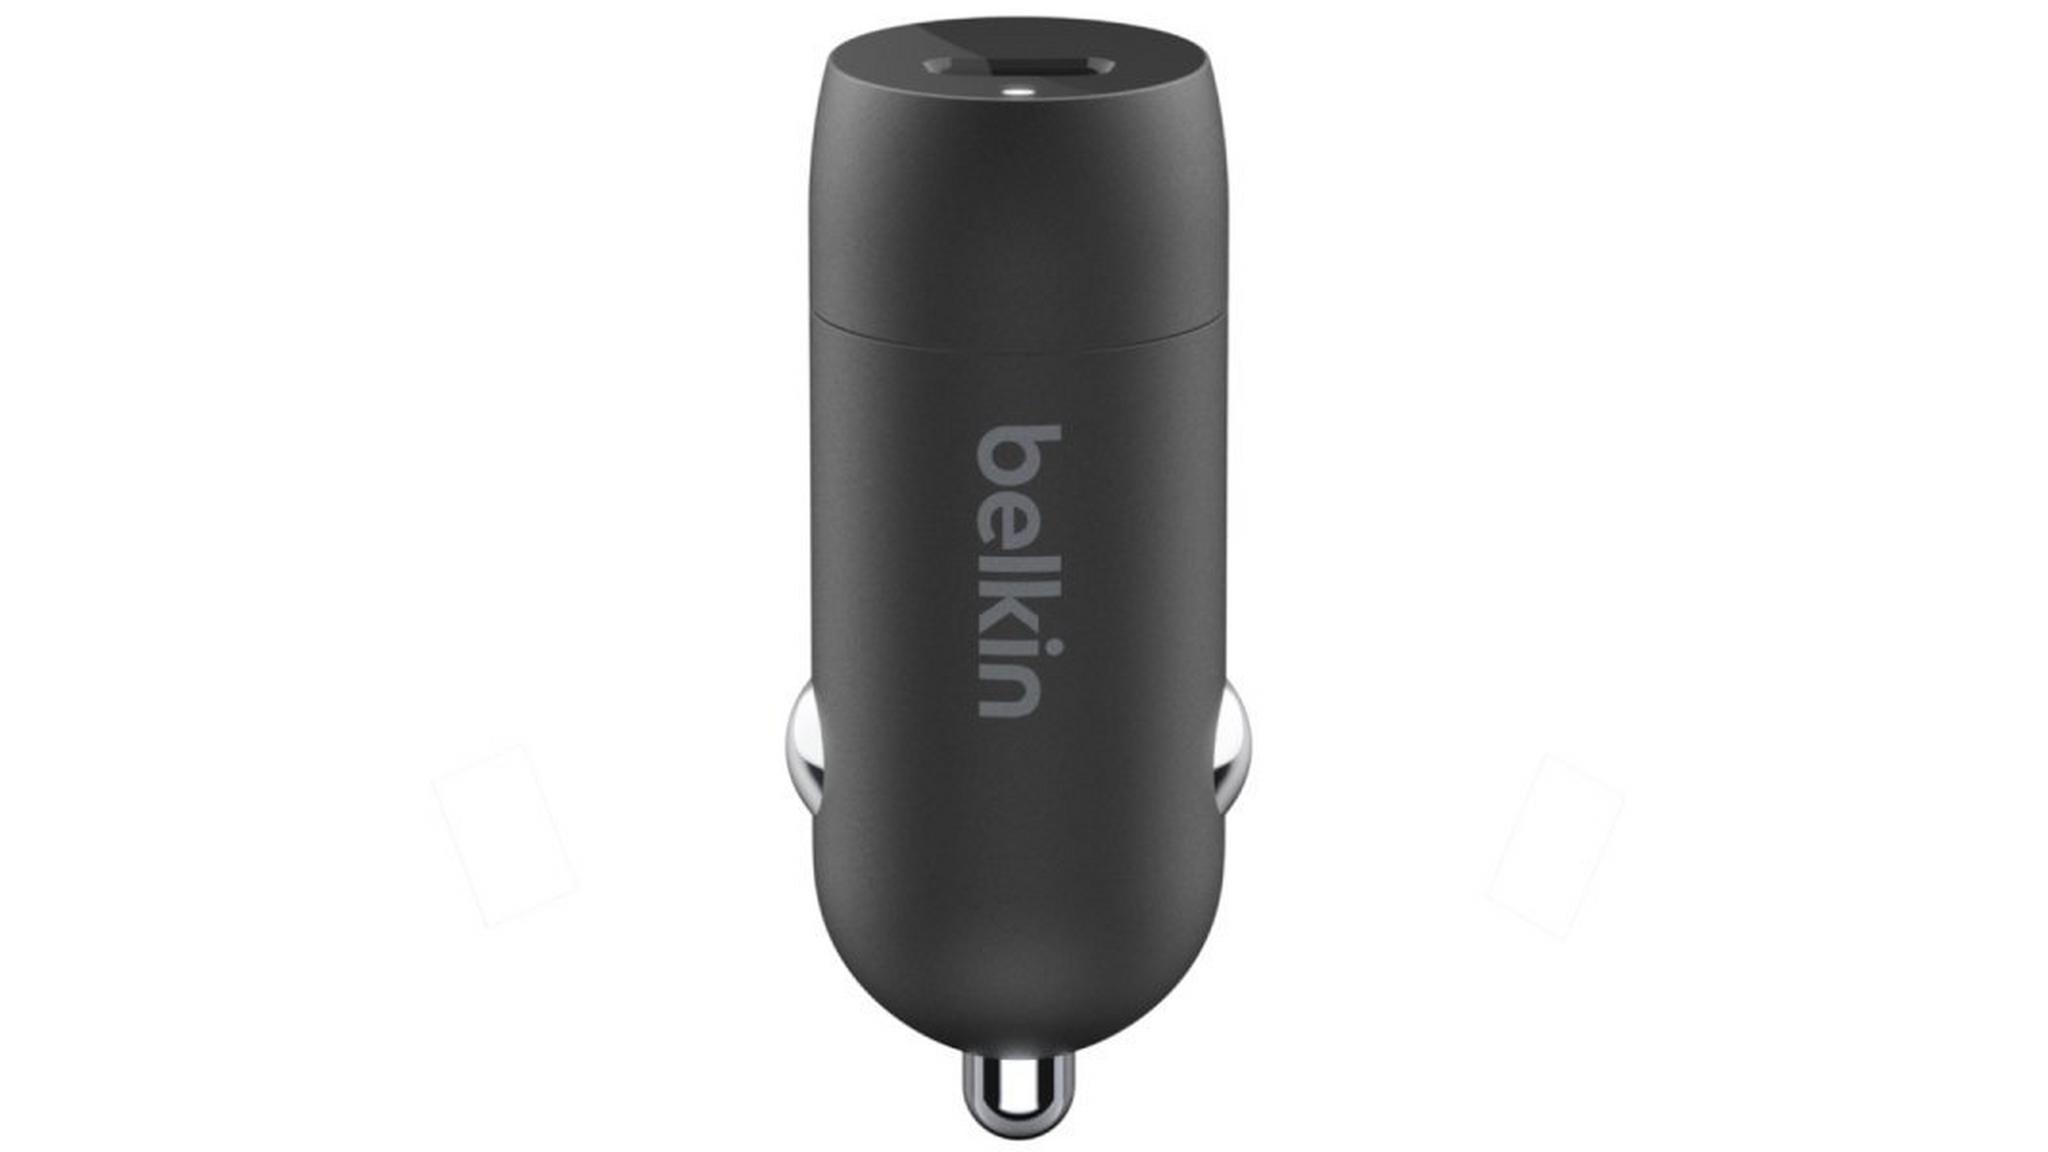 Belkin Boost Charge USB-C Car Charger 18W + USB-C Cable with Lightning Connector (F7U099) - Black